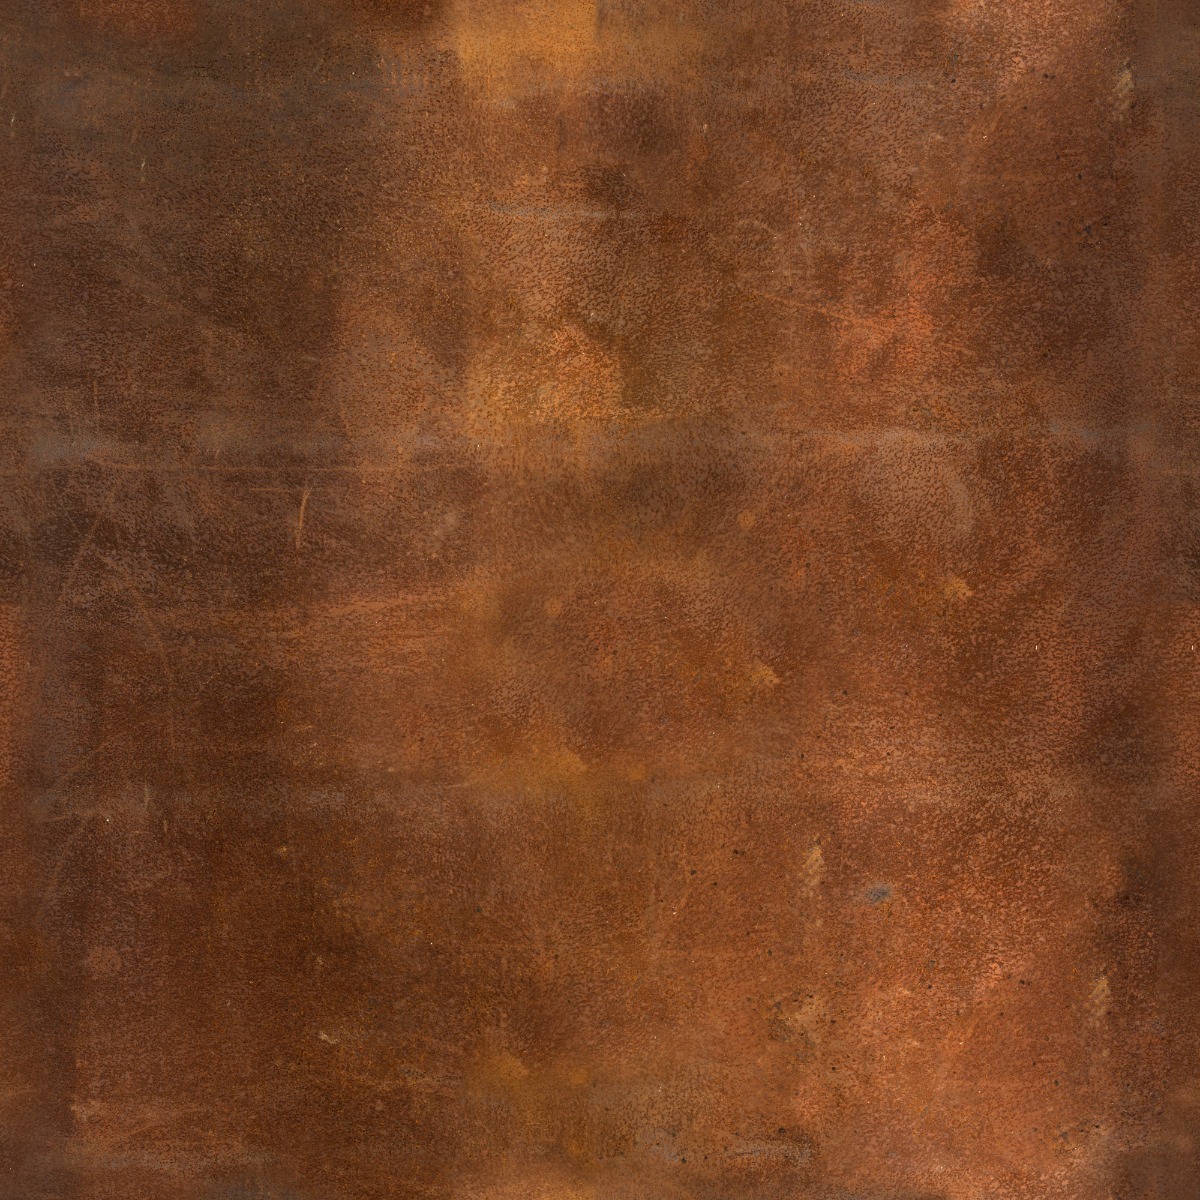 A seamless metal texture with rusted iron sheets arranged in a None pattern